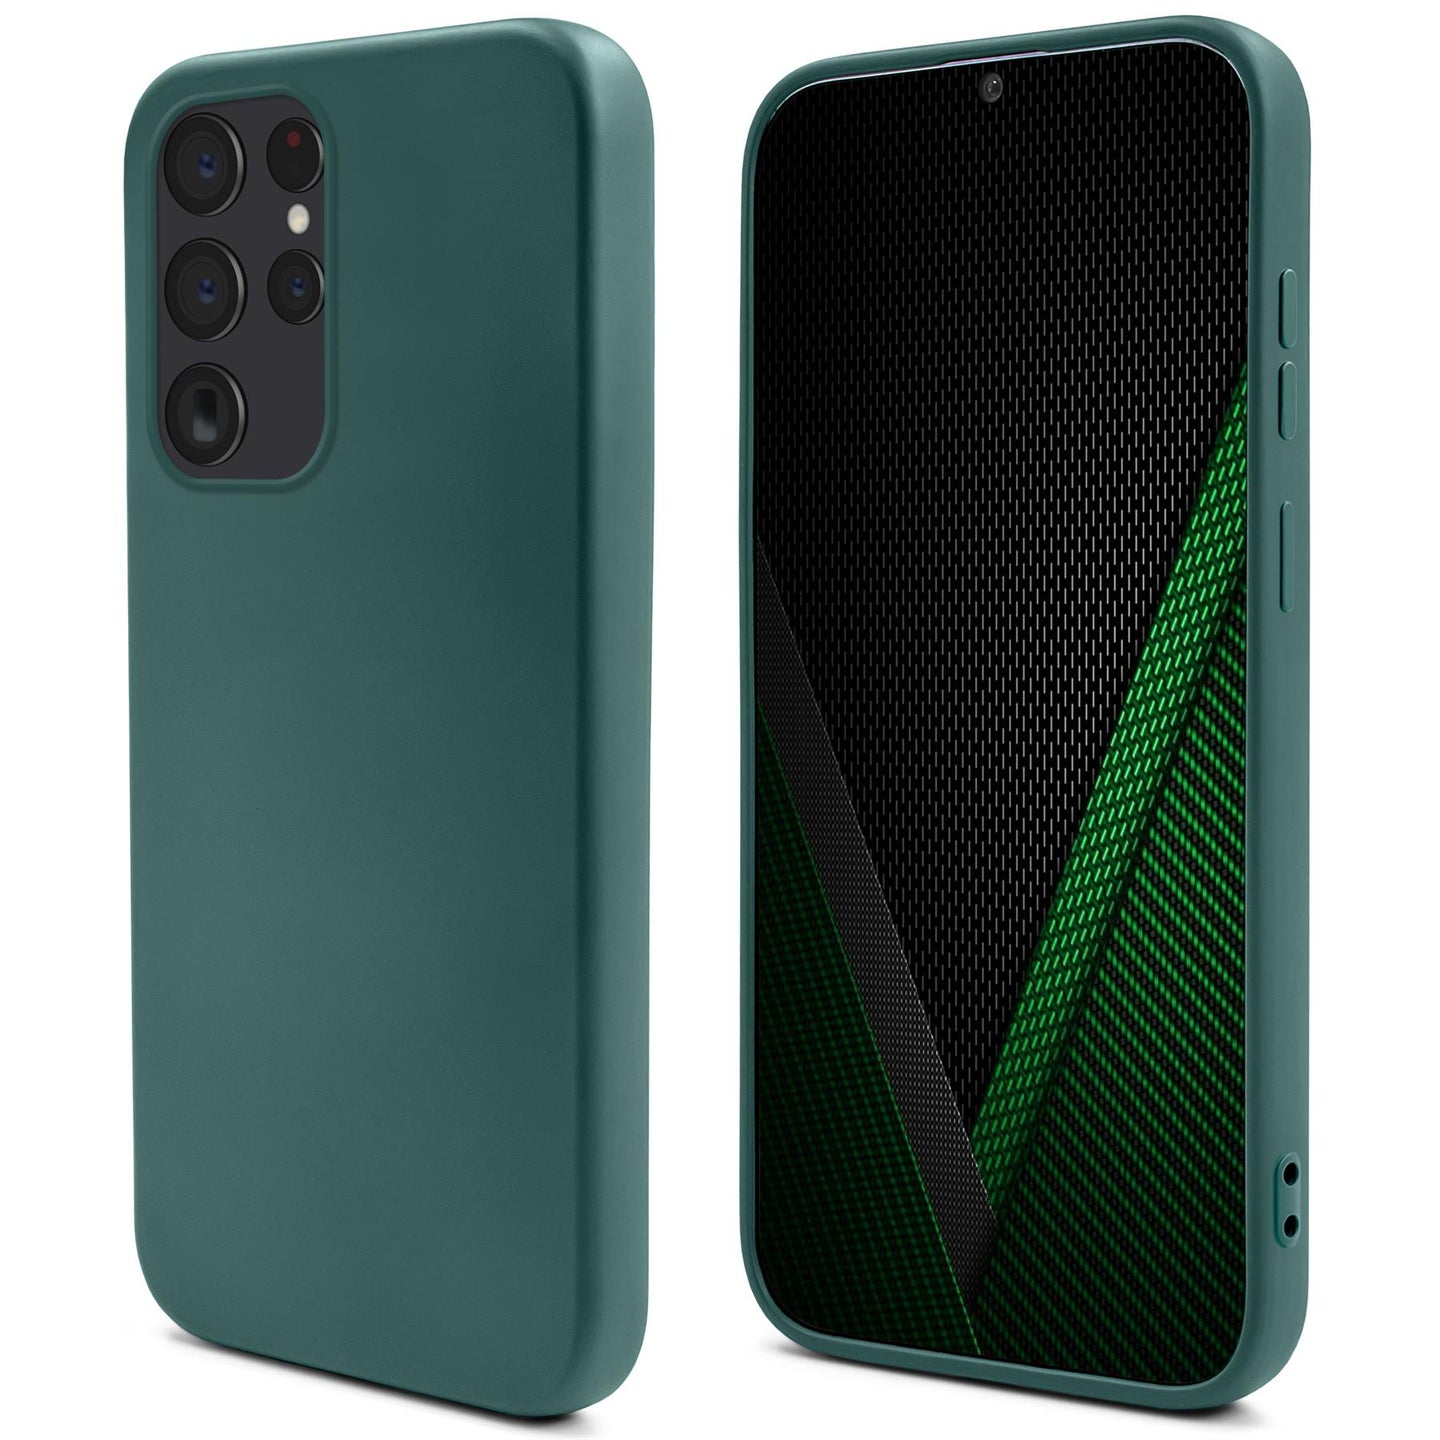 Moozy Lifestyle. Silicone Case for Samsung S23 Ultra, Dark Green - Liquid Silicone Lightweight Cover with Matte Finish and Soft Microfiber Lining, Premium Silicone Case